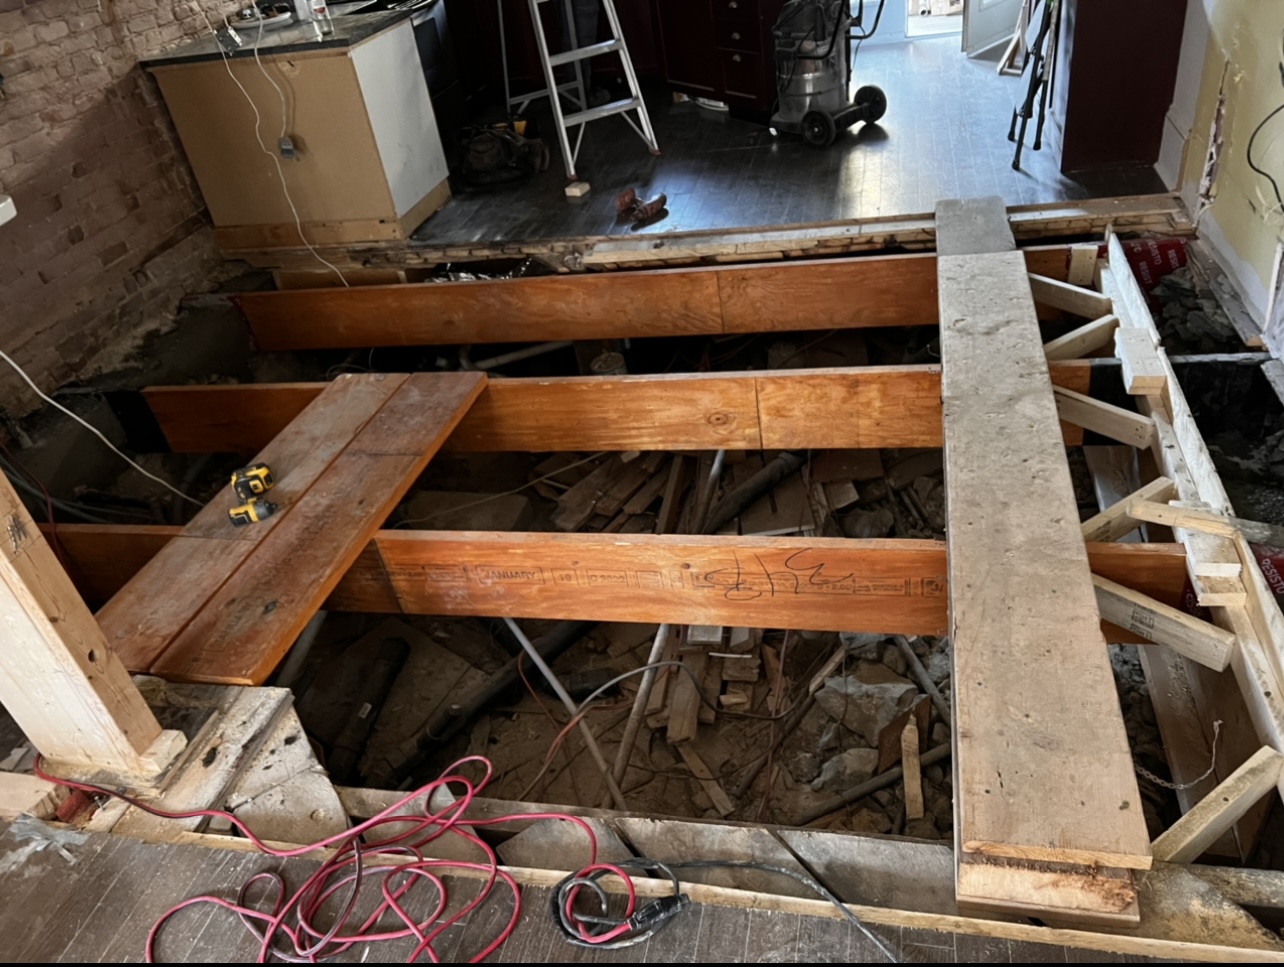 STRUCTURAl REPAIR FOR THE FLOOR